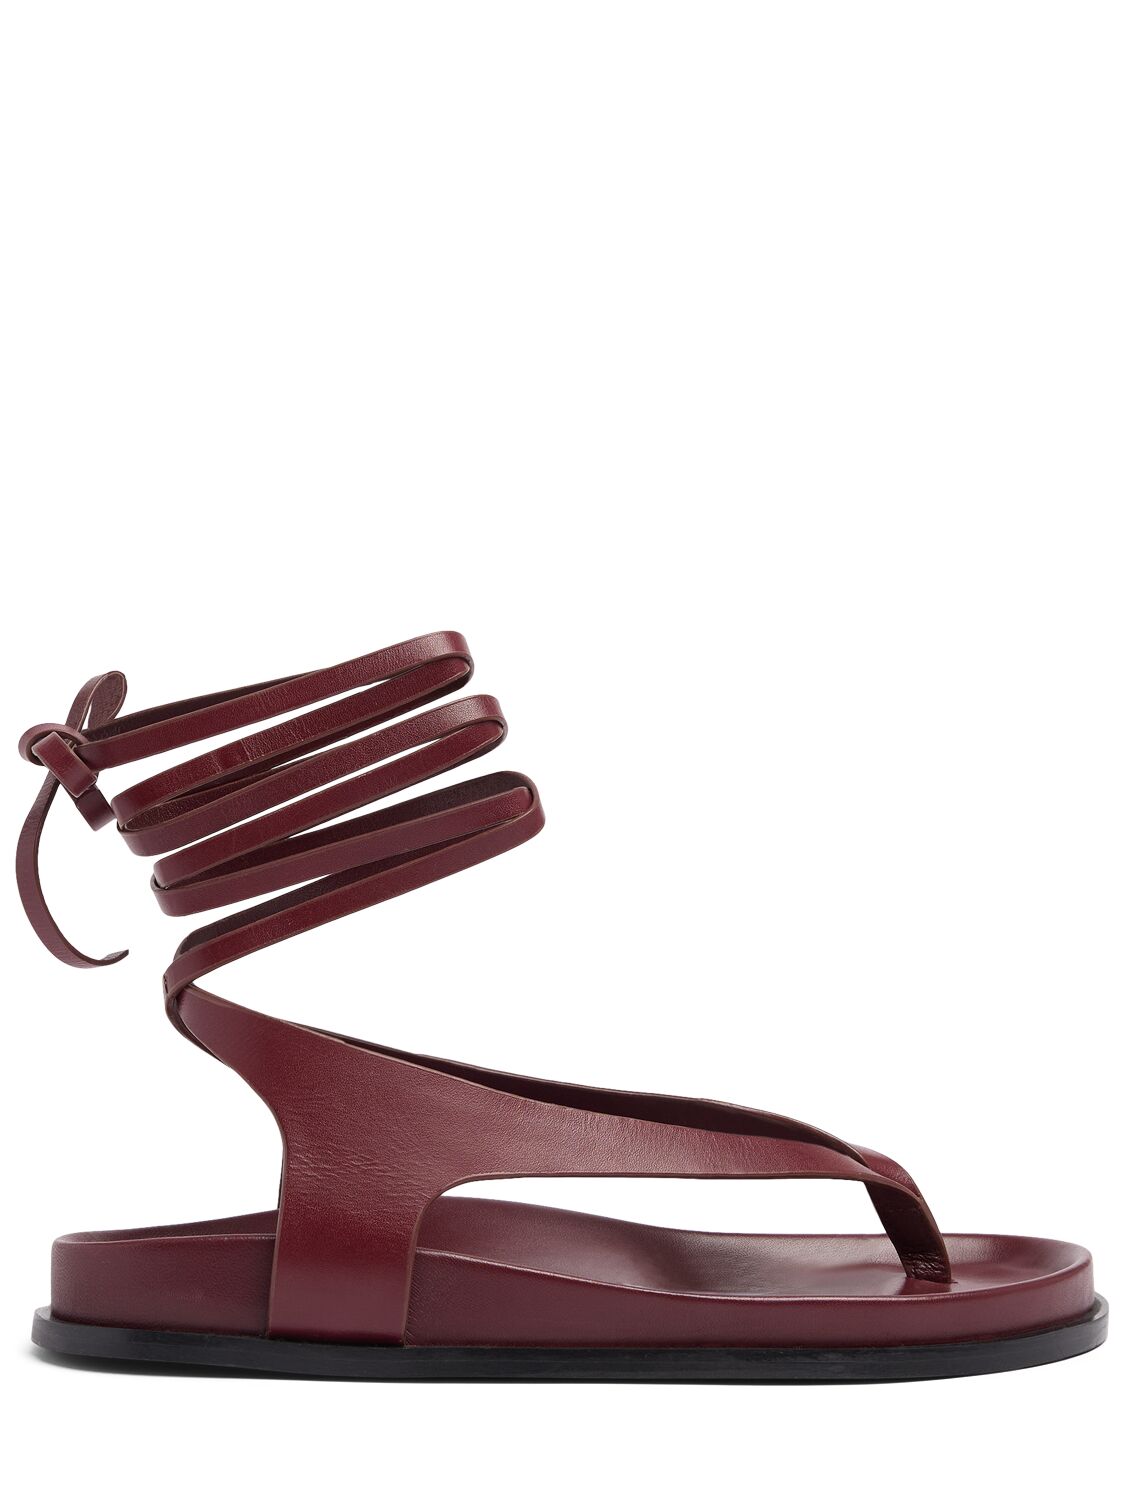 A.emery 10mm Shel Leather Sandals In Merlot